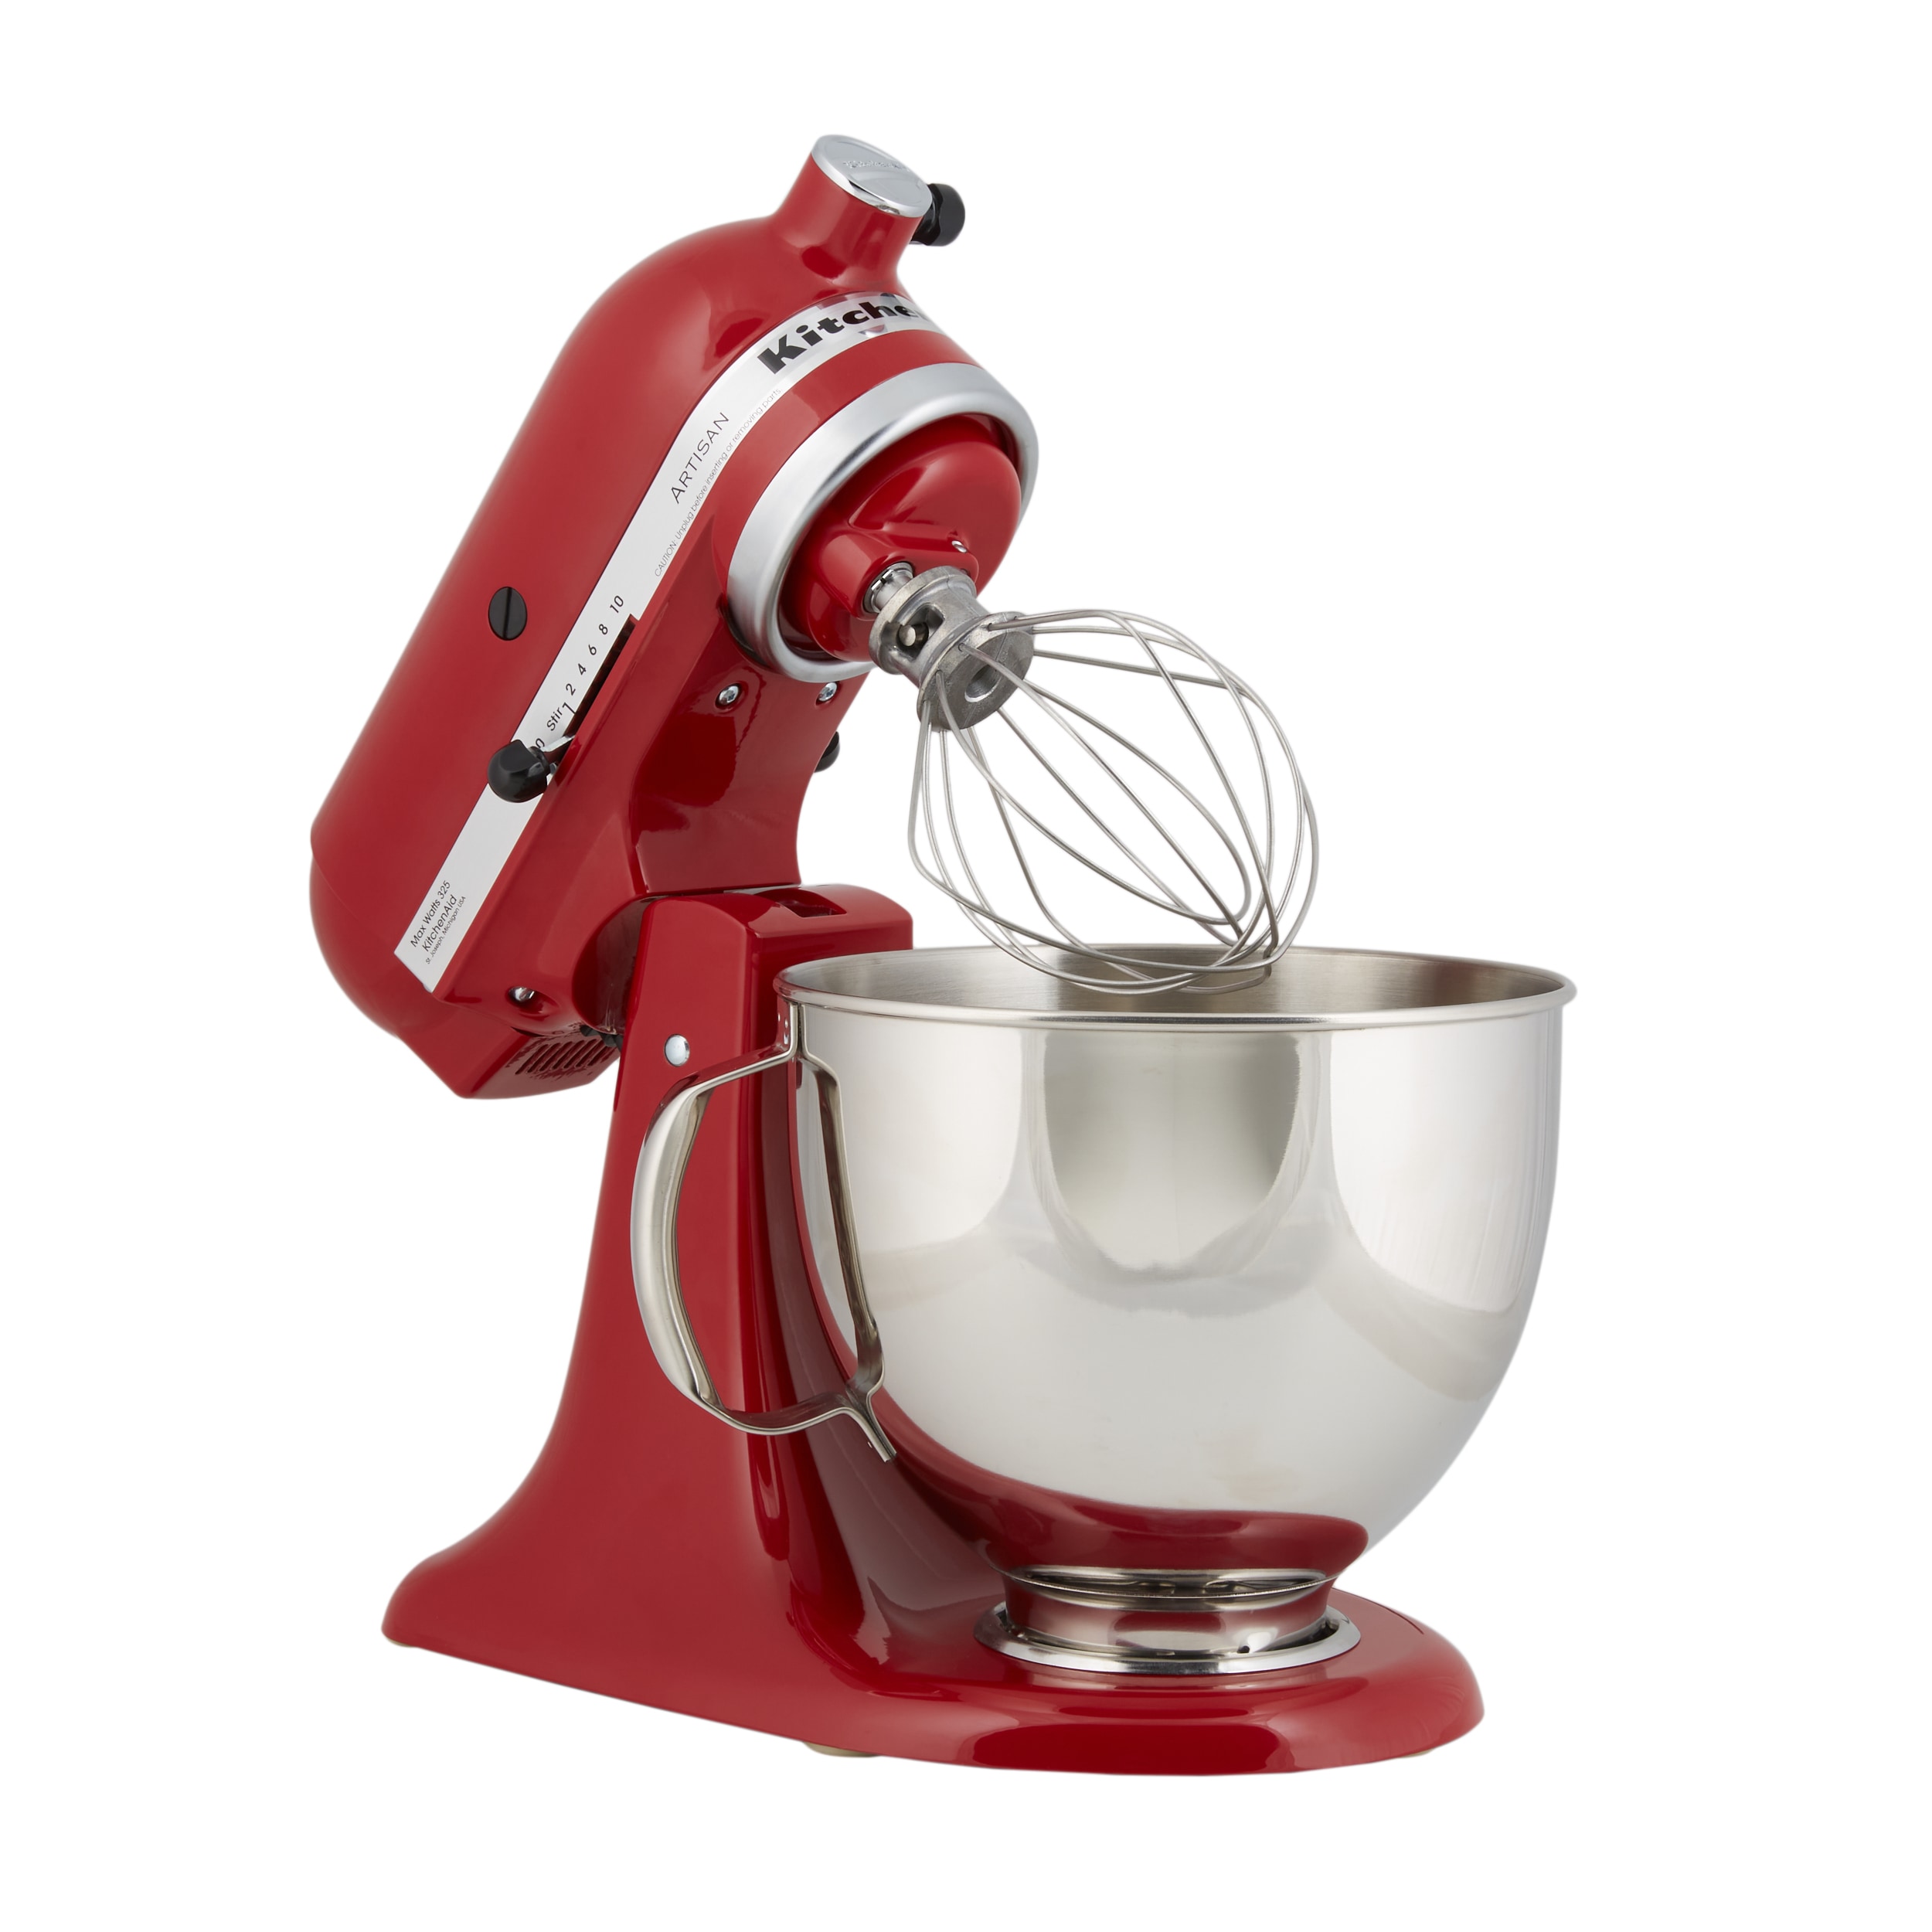 KitchenAid Artisan Artisan Series Empire Red Residential Stand Mixer at Lowes.com